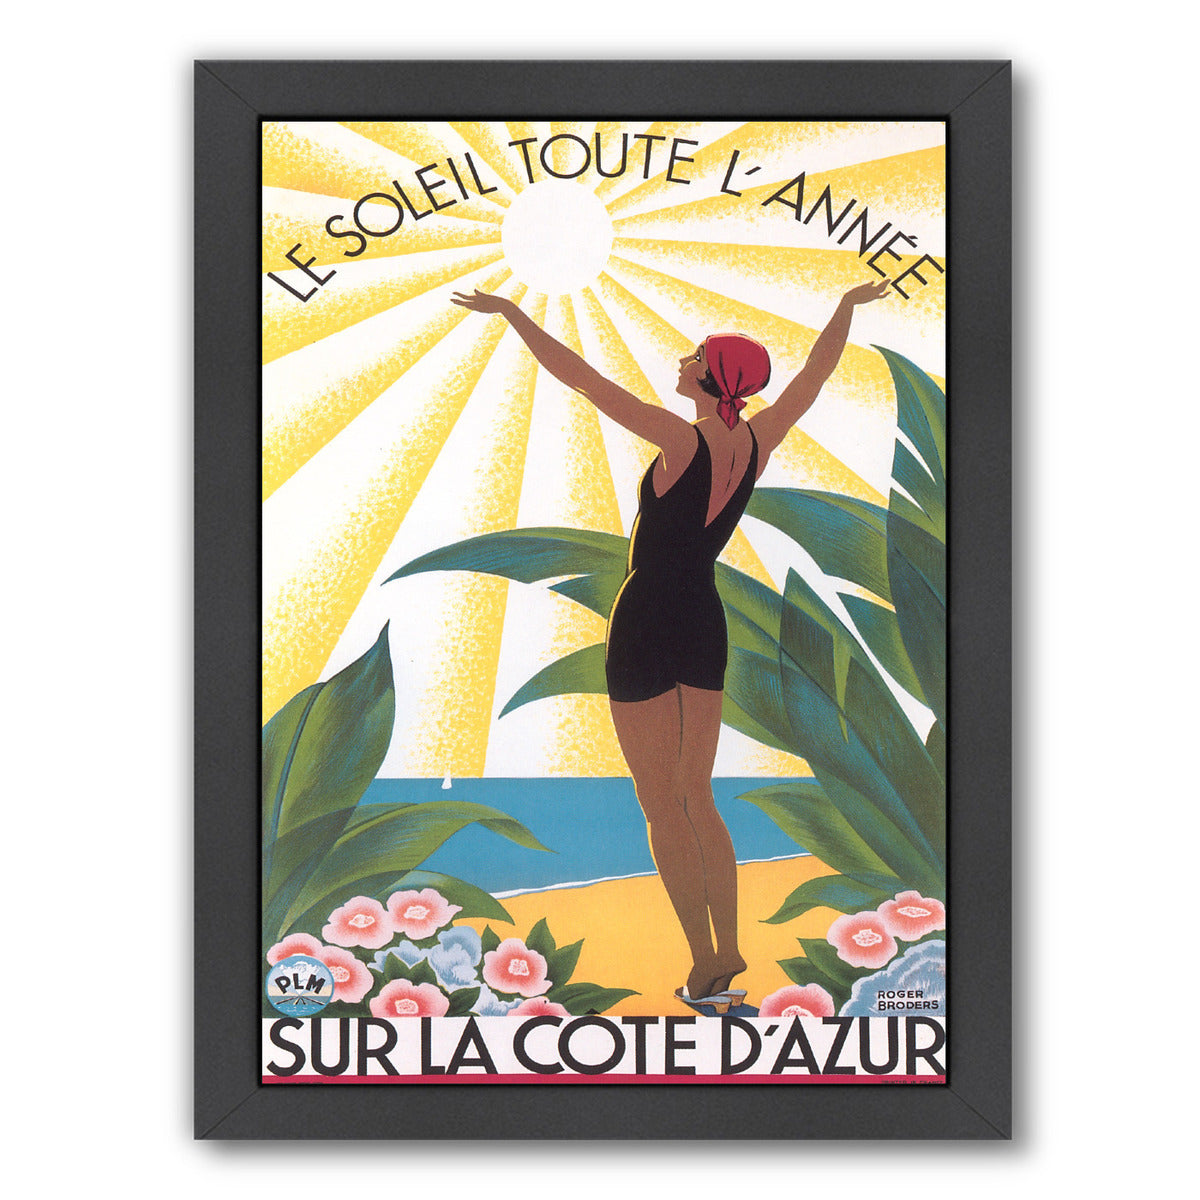 Travel Poster For Cote D Azur by Found Image Press Framed Print - Americanflat